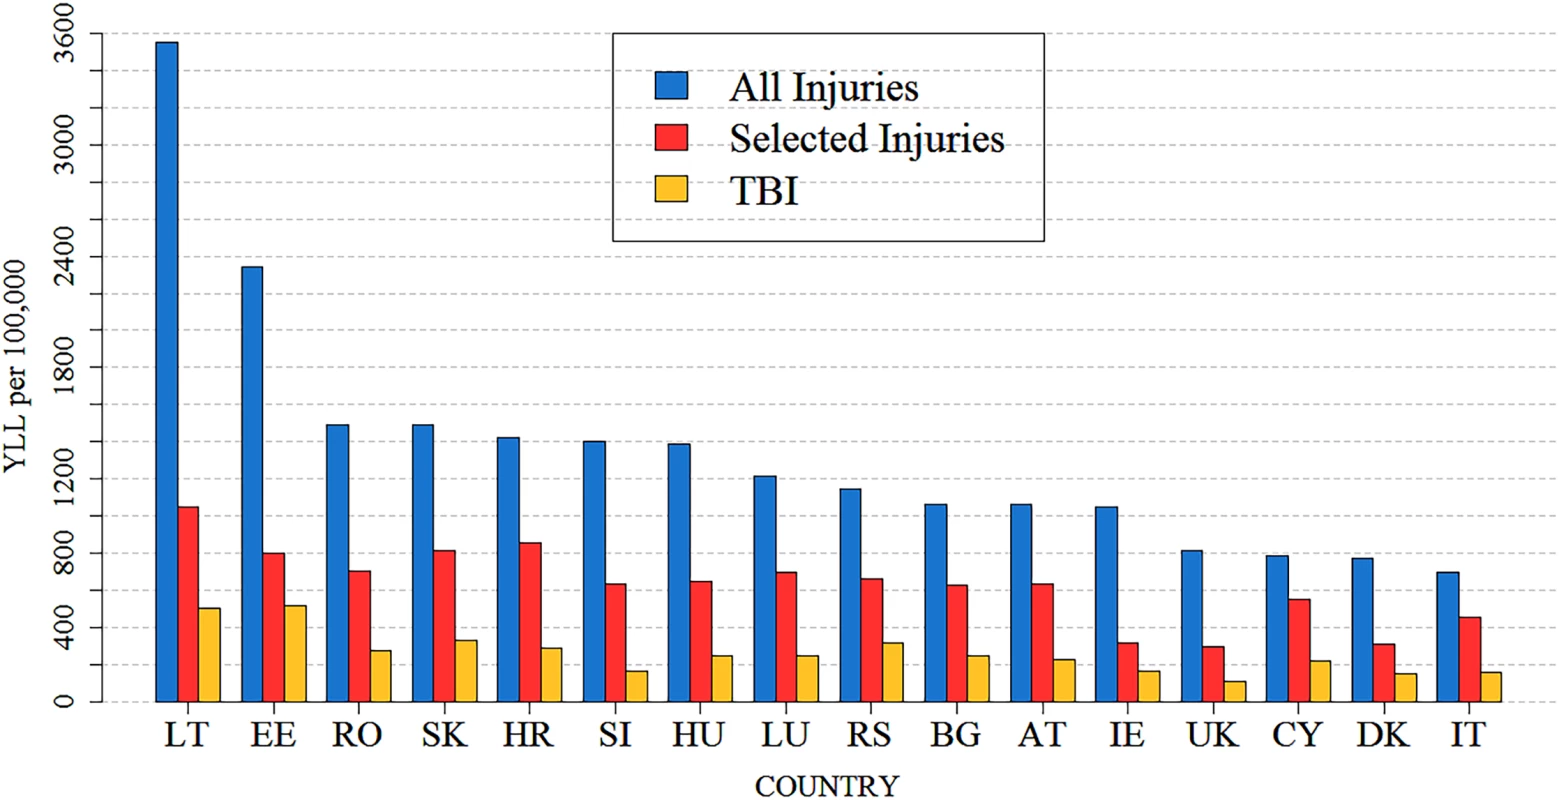 Age-standardized injury YLL rates and TBI YLL rates per 100,000 persons in 16 European countries in 2013.